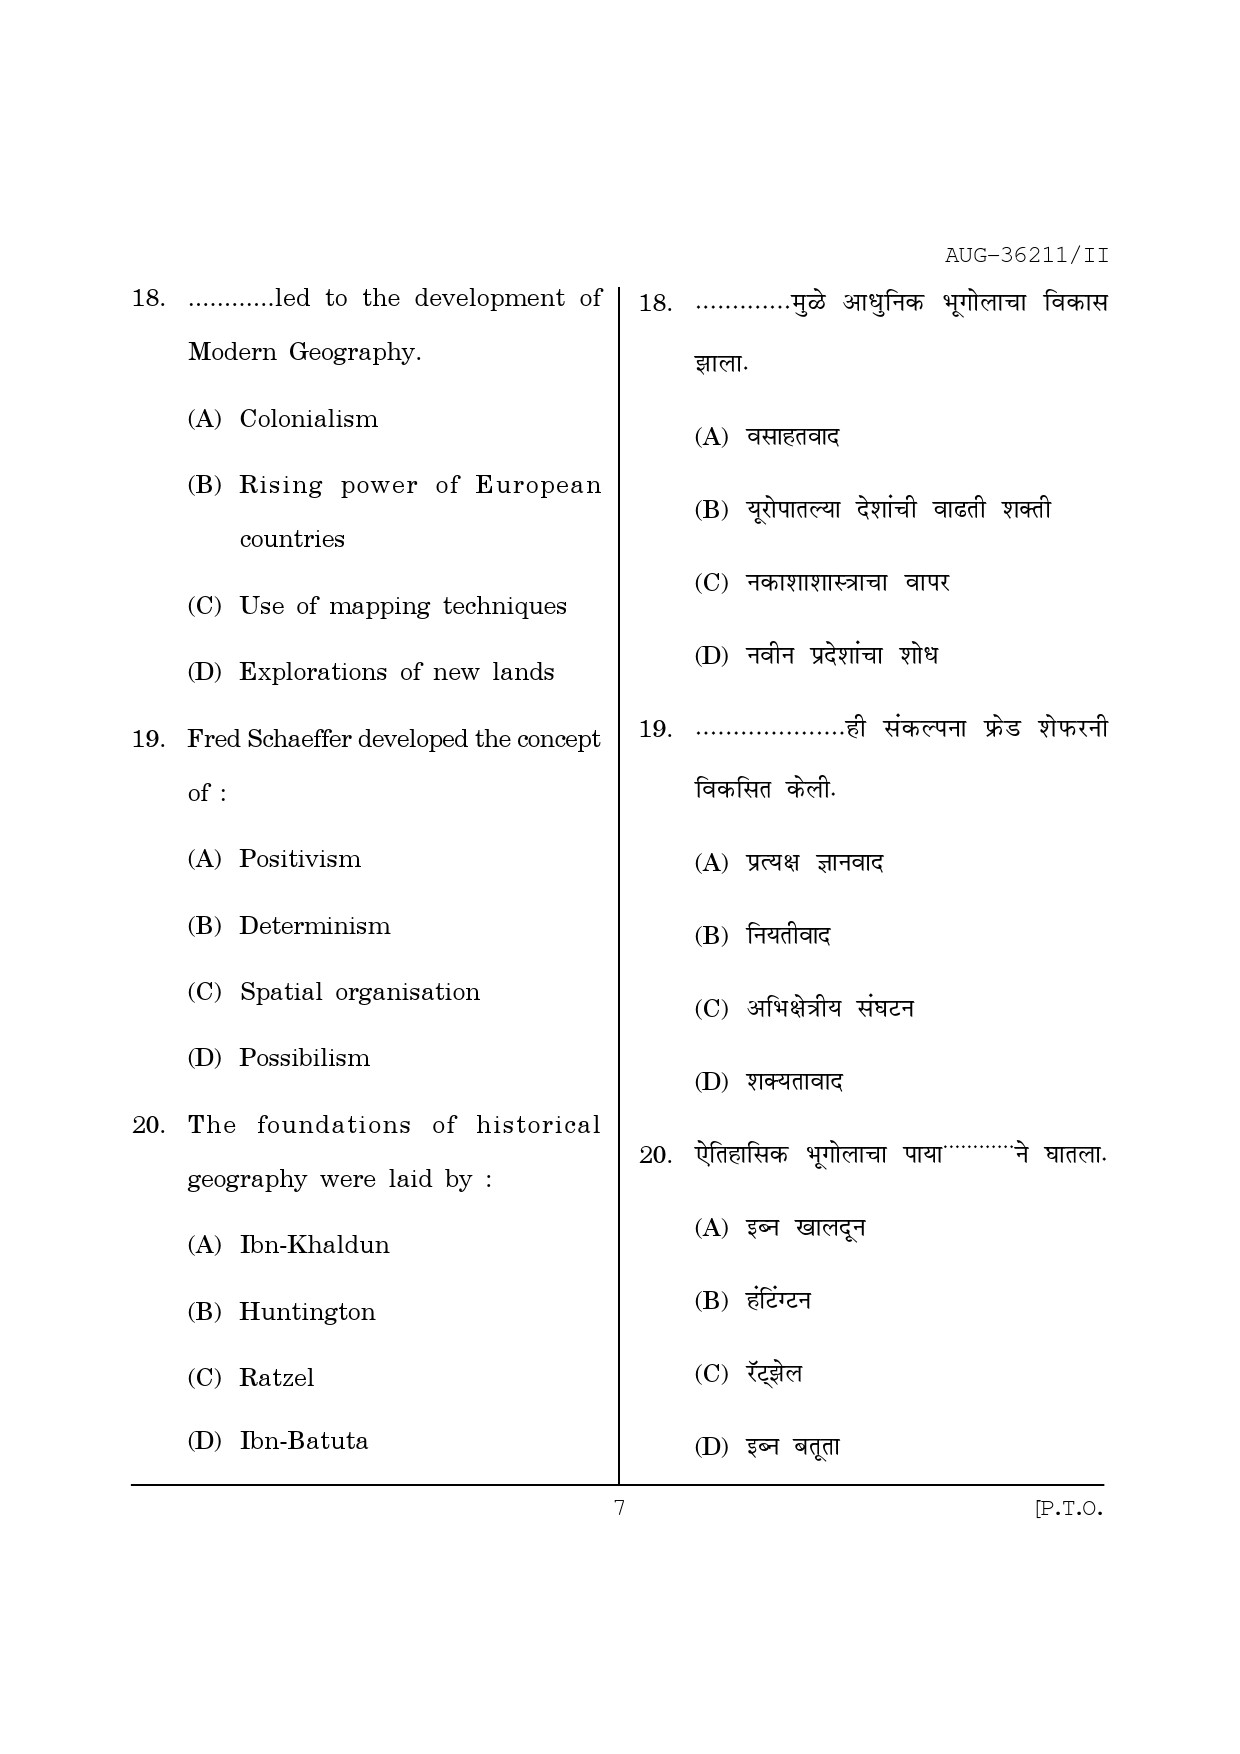 Maharashtra SET Geography Question Paper II August 2011 7